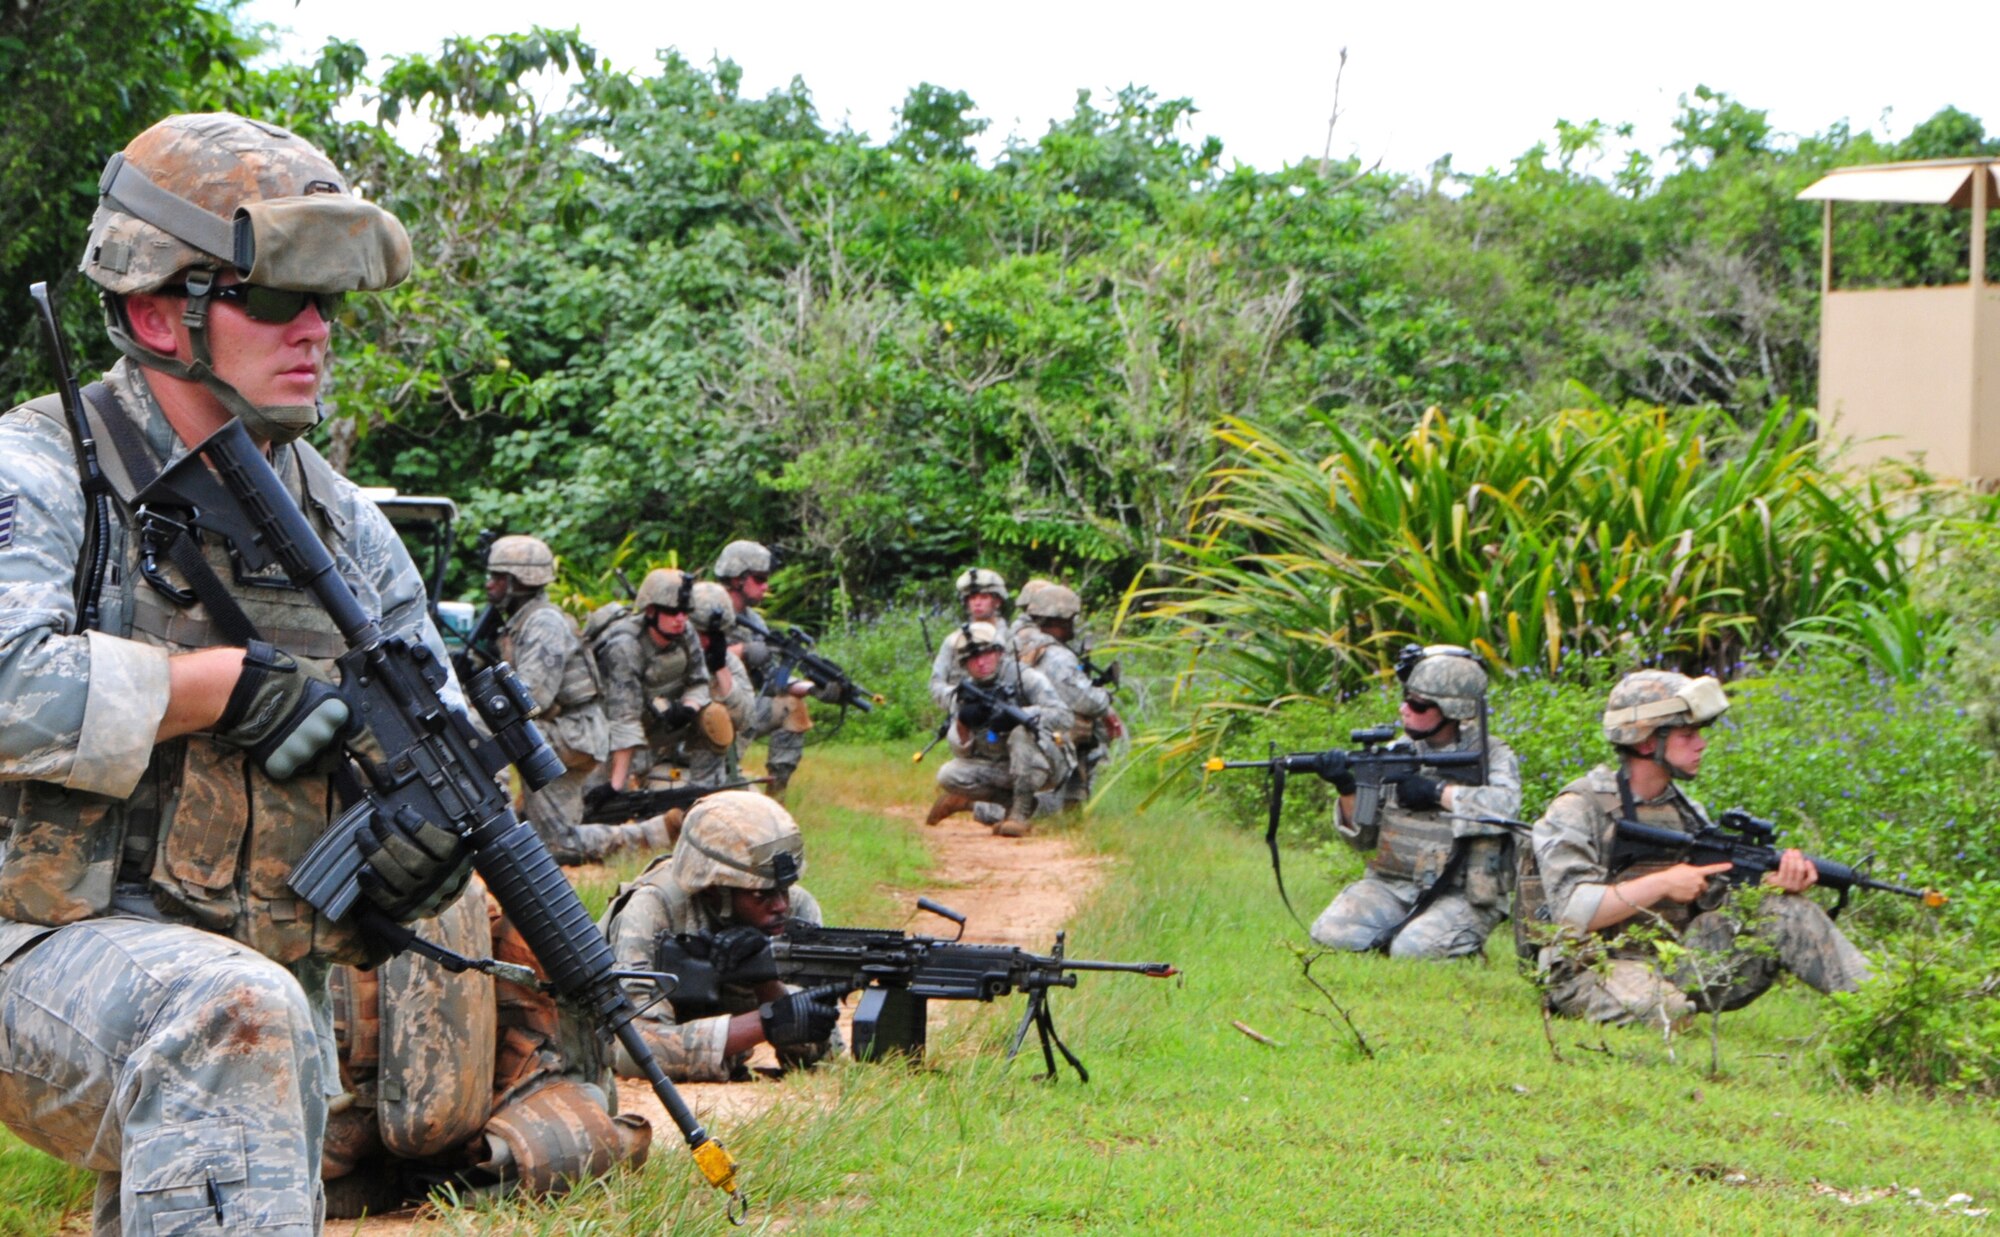 PACIFIC REGIONAL TRAINING CENTER, Guam – A Commando Warrior fire team stays low and vigilant after being fired at during a patrol scenario here, Sept. 24. Security forces Airmen from all over the Pacific travel to Guam in order to receive mandatory contingency training from the 736th Security Forces Squadron Commando Warrior flight in preparation for future deployments downrange. (U.S. Air Force photo by Airman 1st Class Marianique Santos/Released)